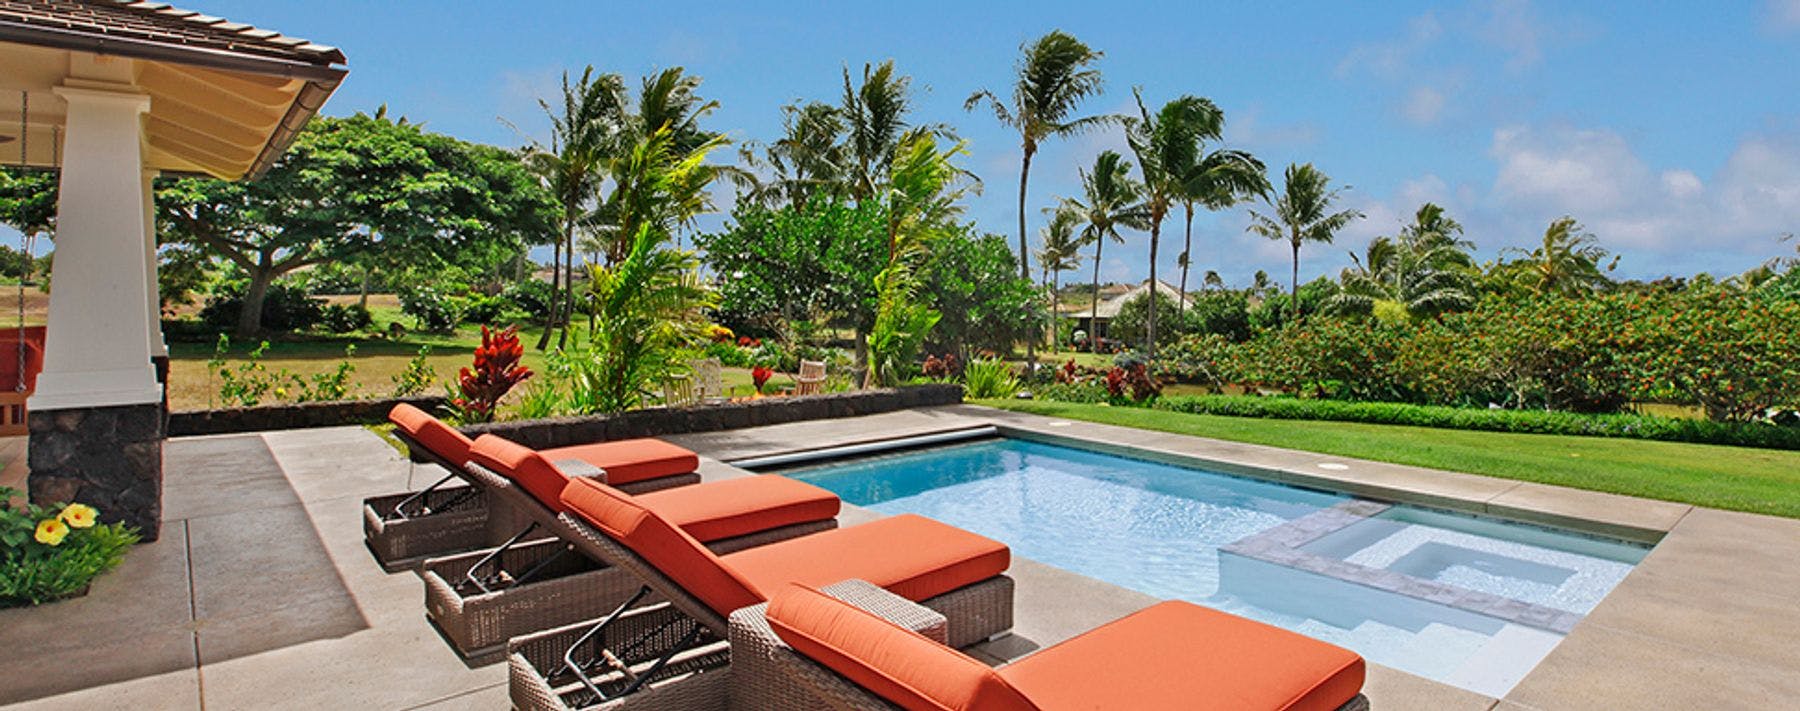 Lounge furniture by the pool at Kauai vacation rental home